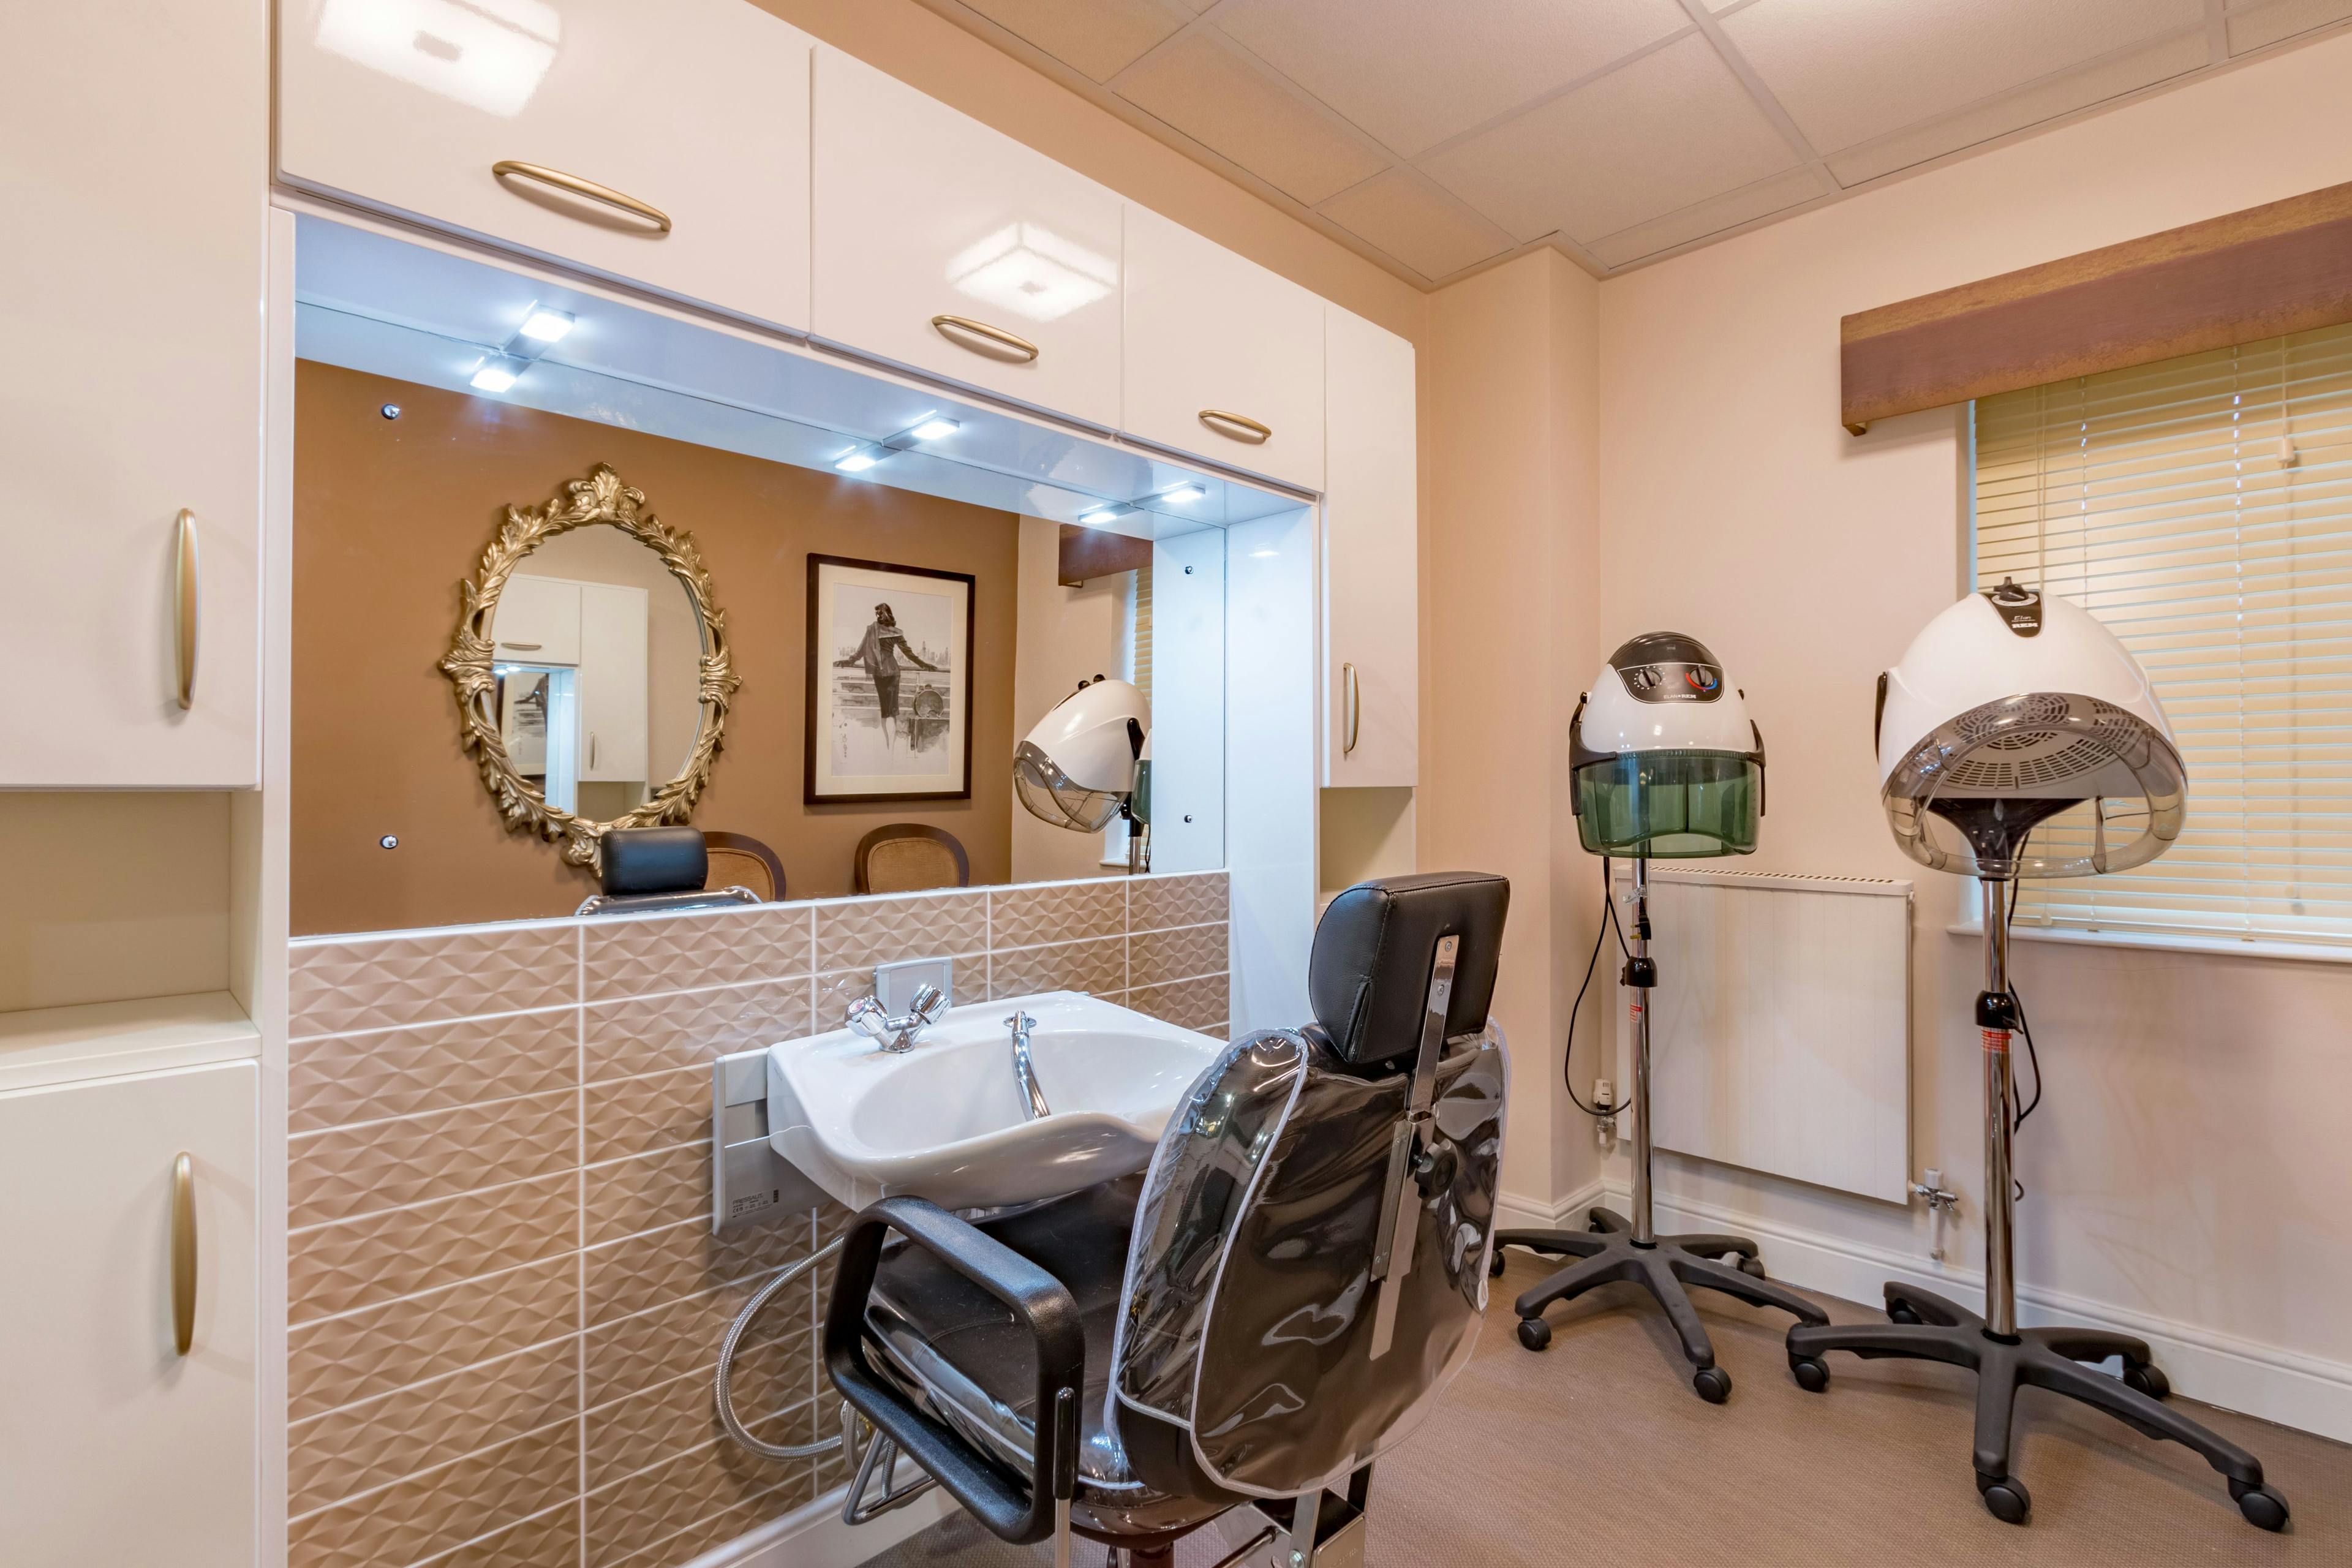 Salon at Meadowbeck Care Home in York, North Yorkshire